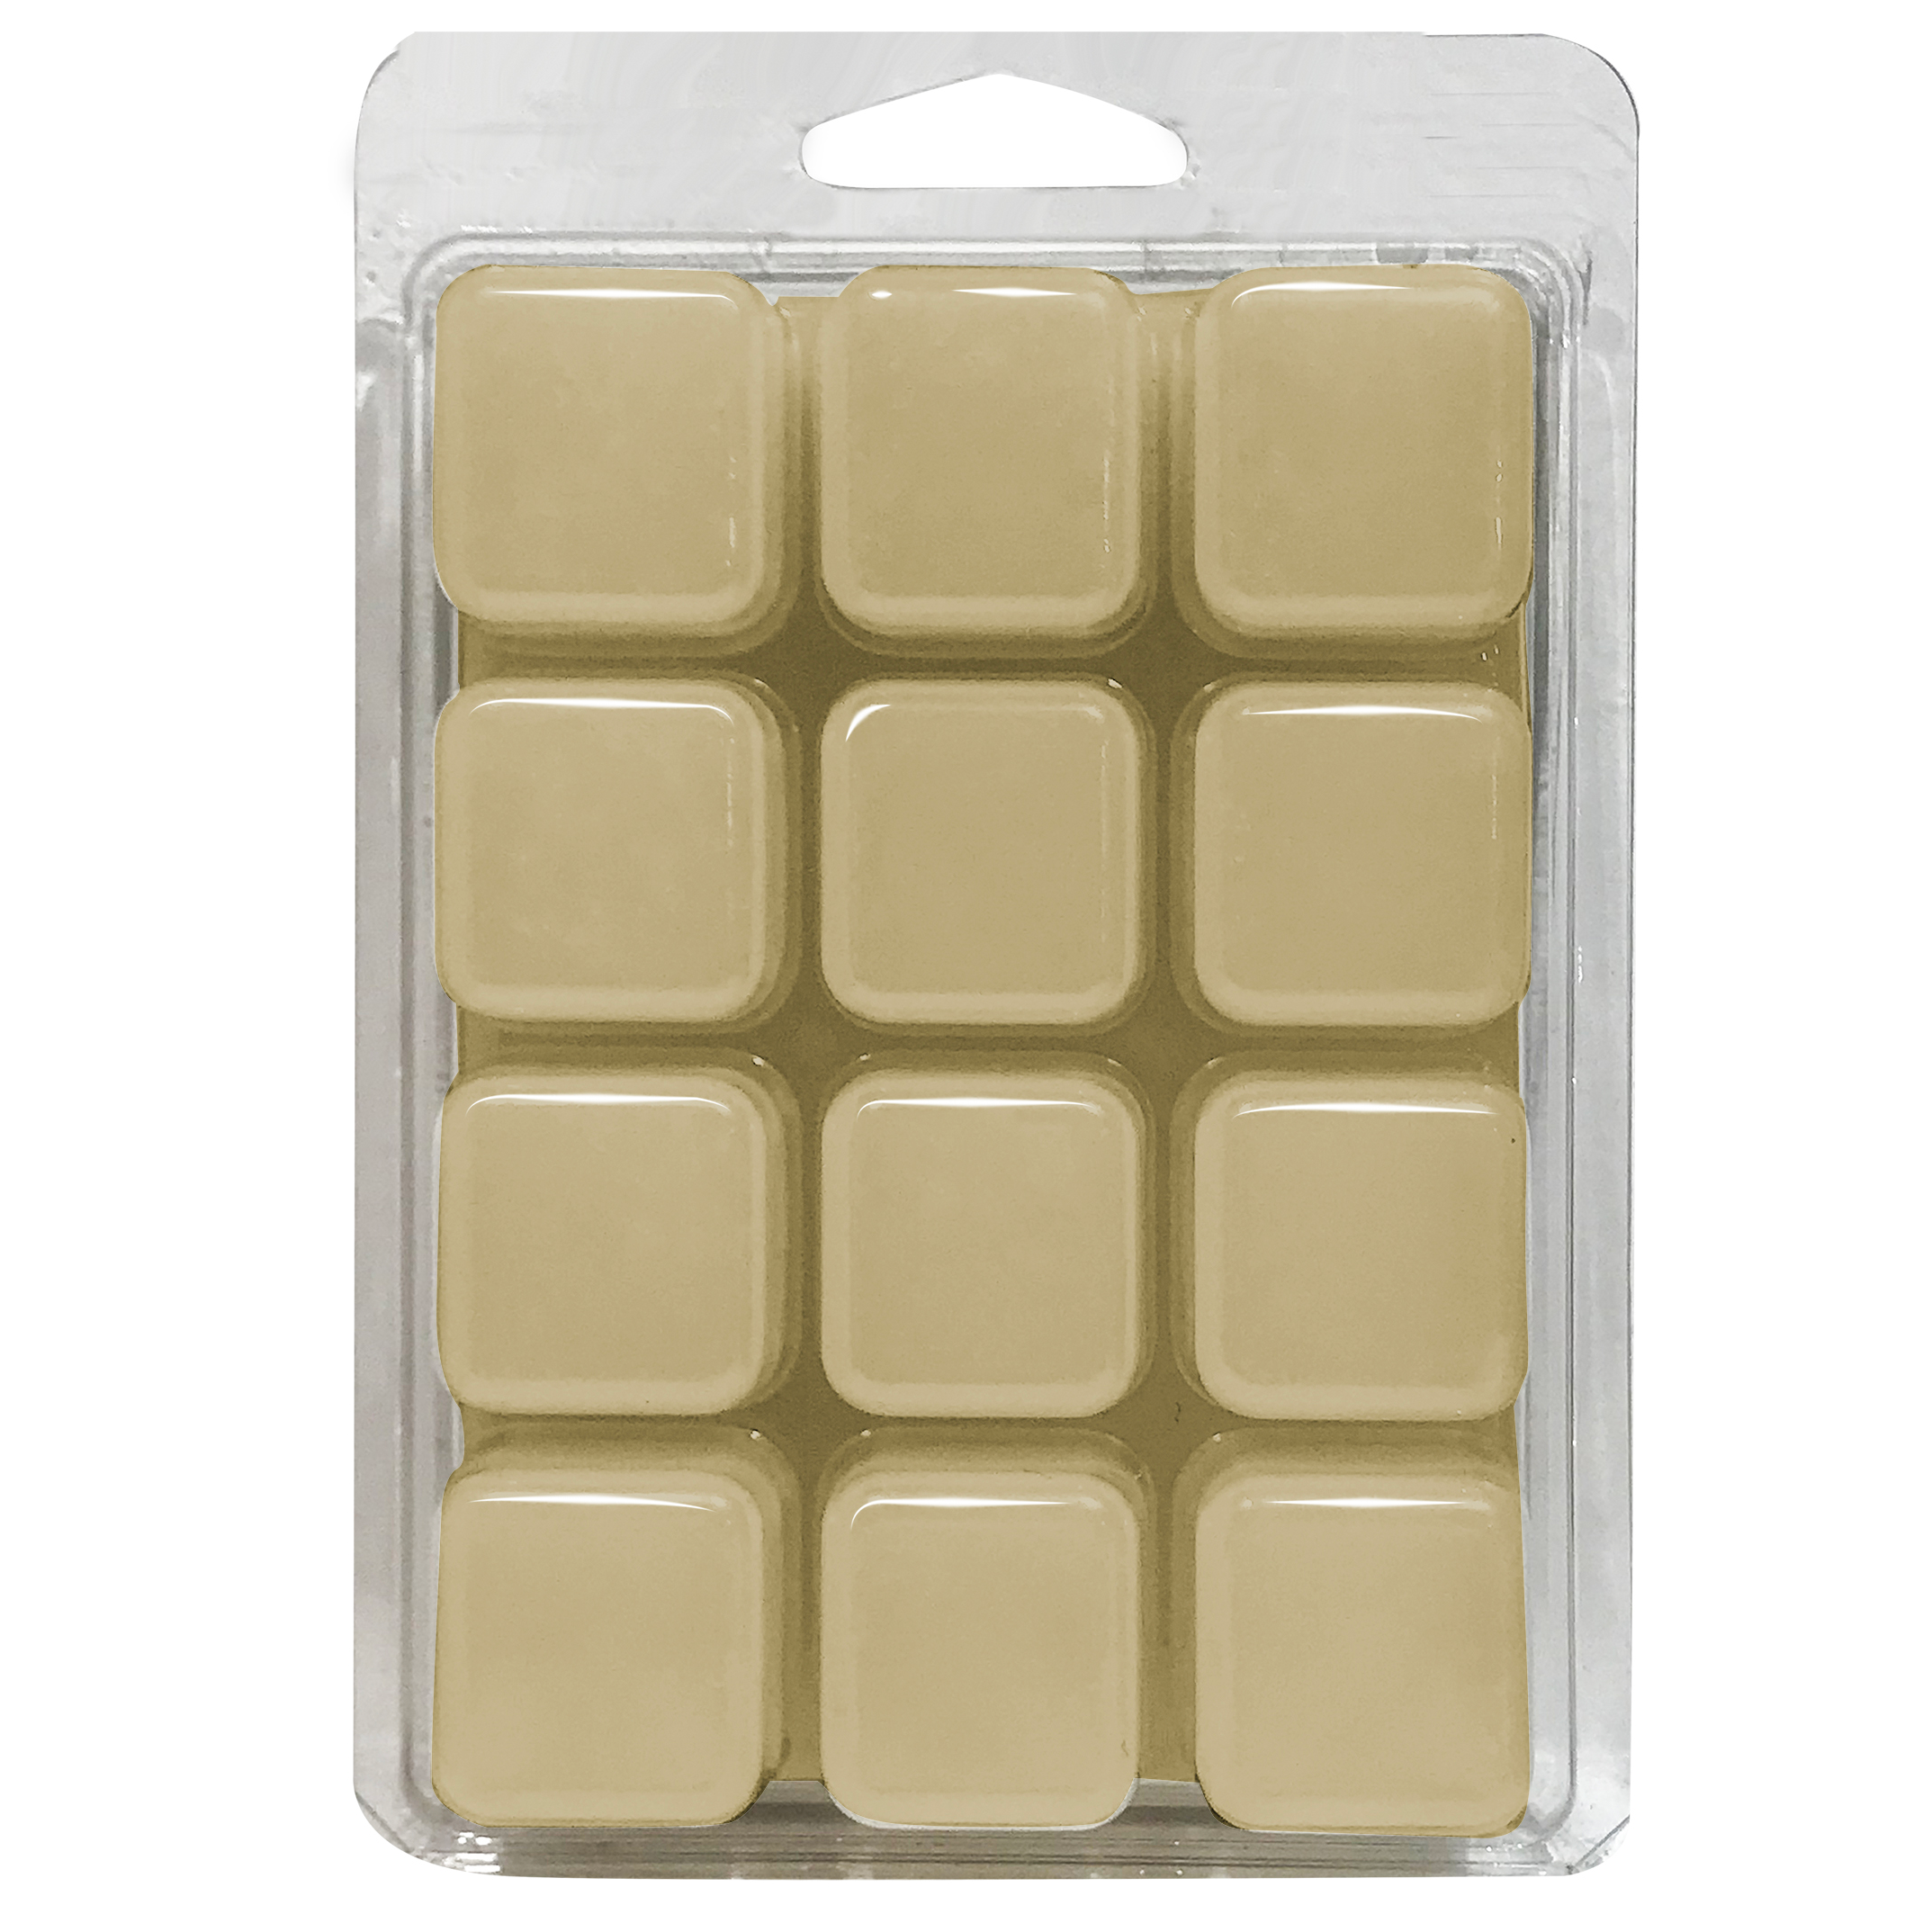 Vanilla Cookie Crunch Scented Wax Melts, Better Homes & Gardens, 5 oz (Value Size) - image 2 of 9